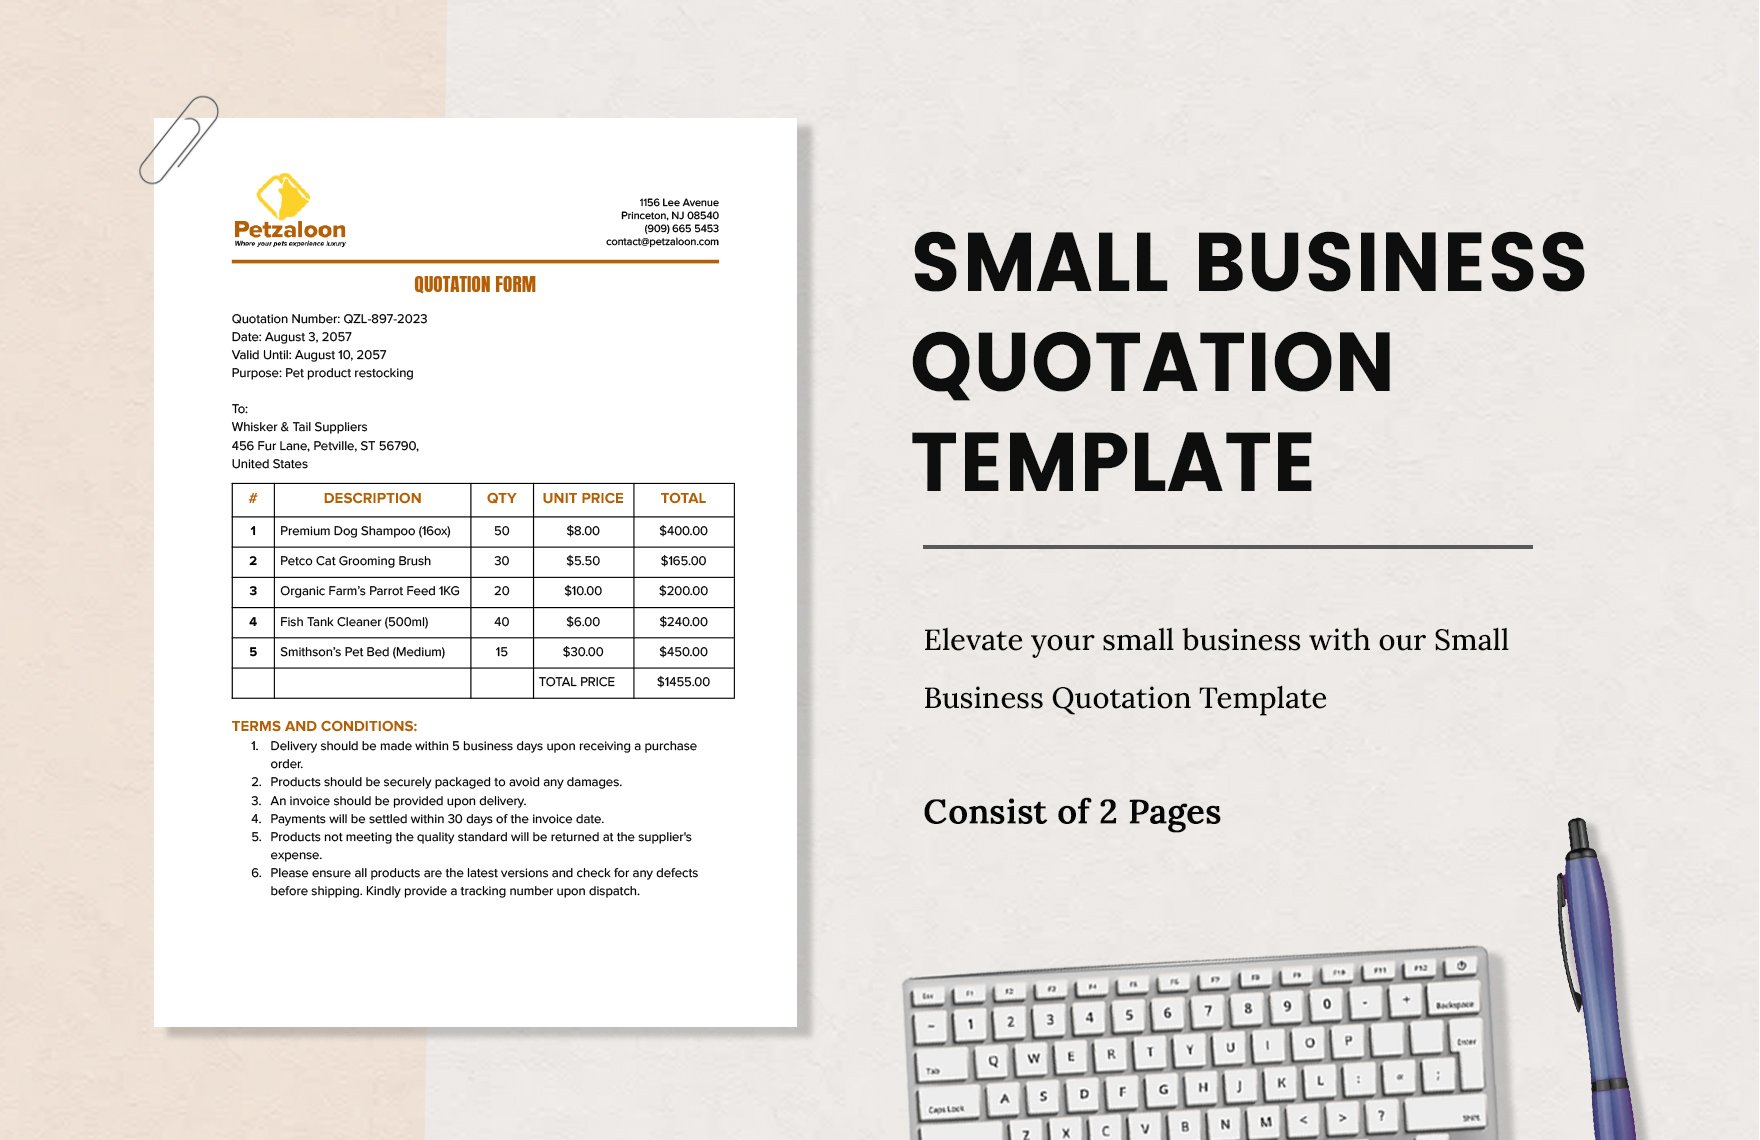  Small Business Quotation Template